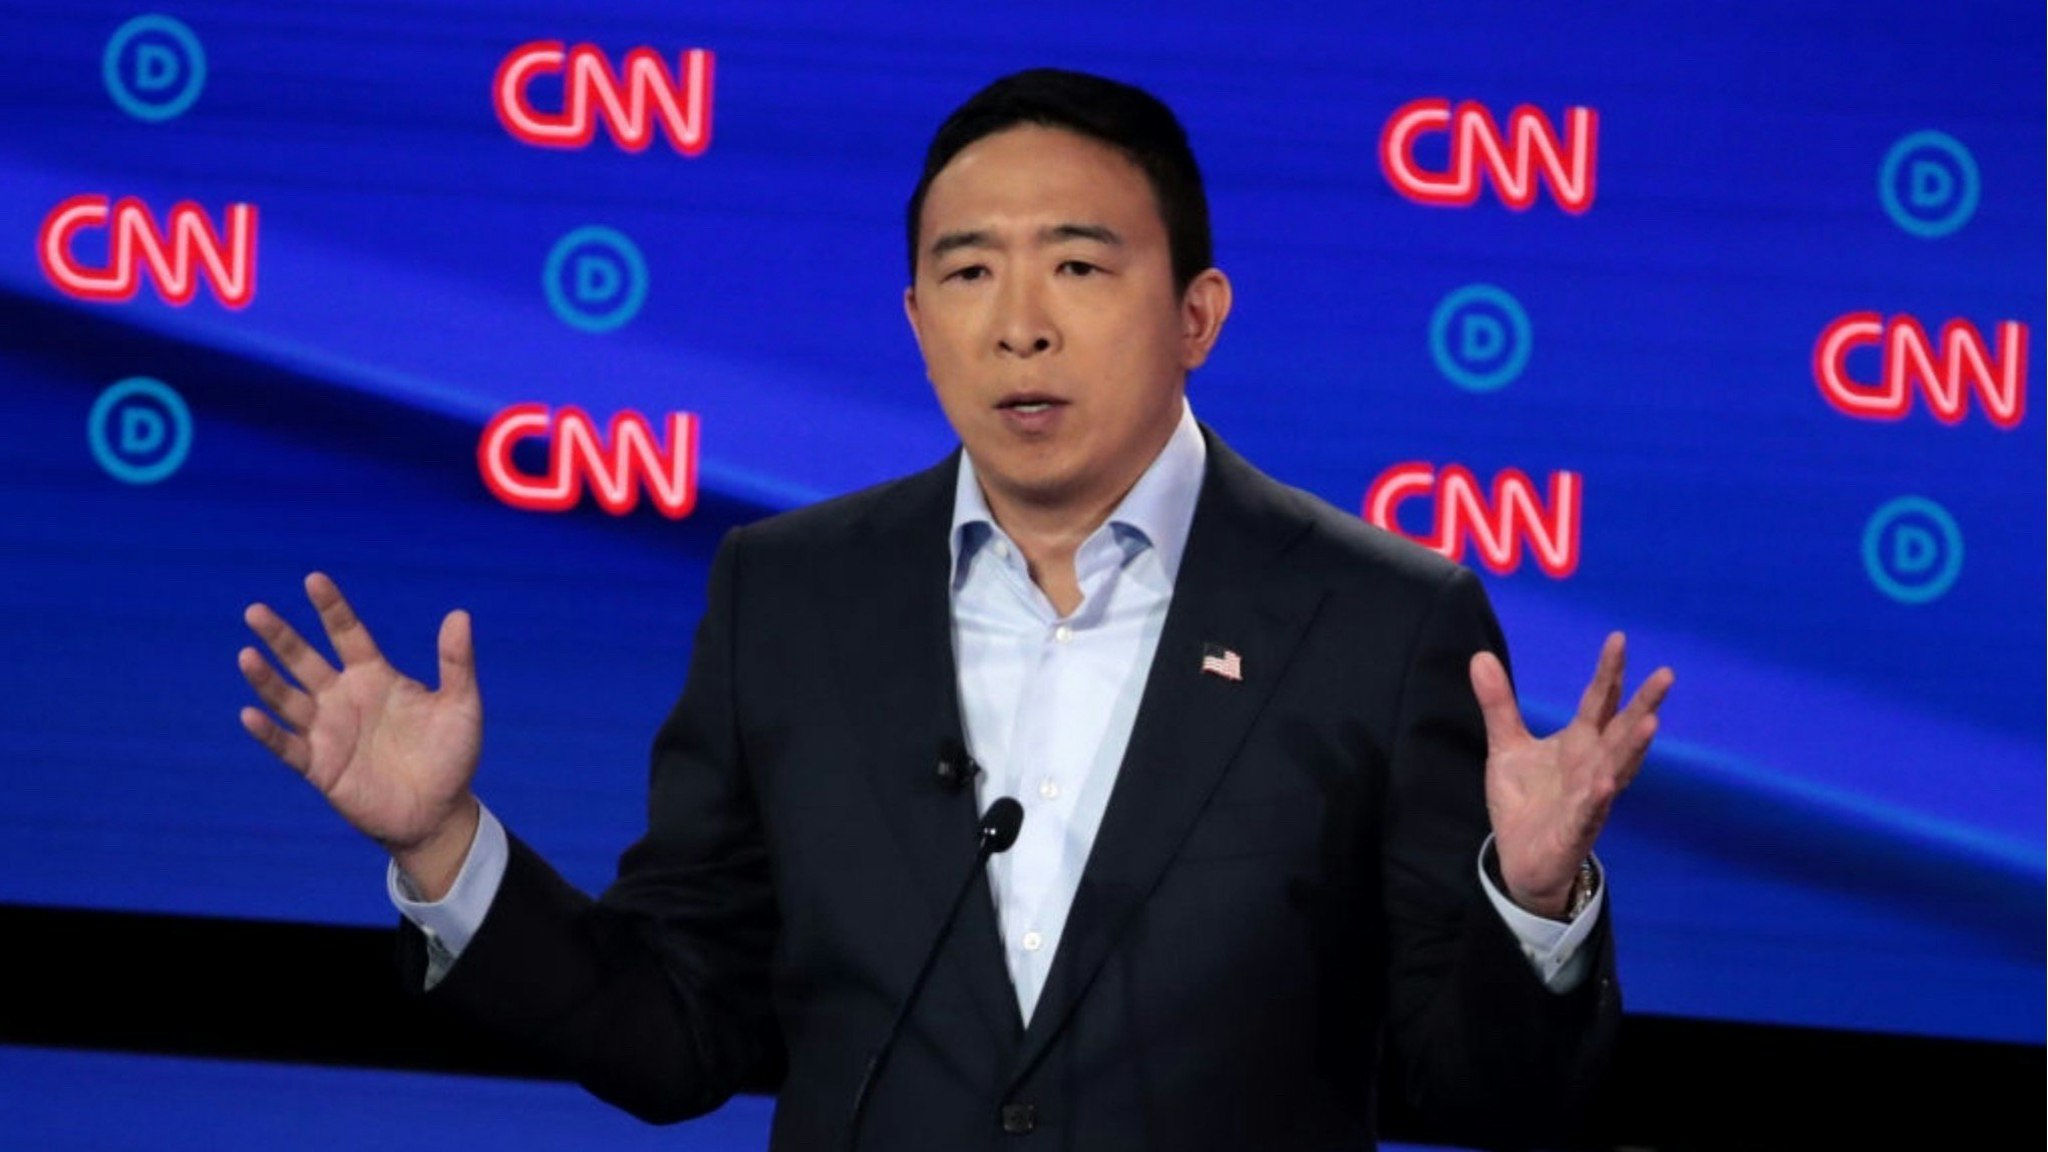 Democratic presidential candidate former tech executive Andrew Yang speaks during the Democratic Presidential Debate at the Fox Theatre July 31, 2019 in Detroit, Michigan.